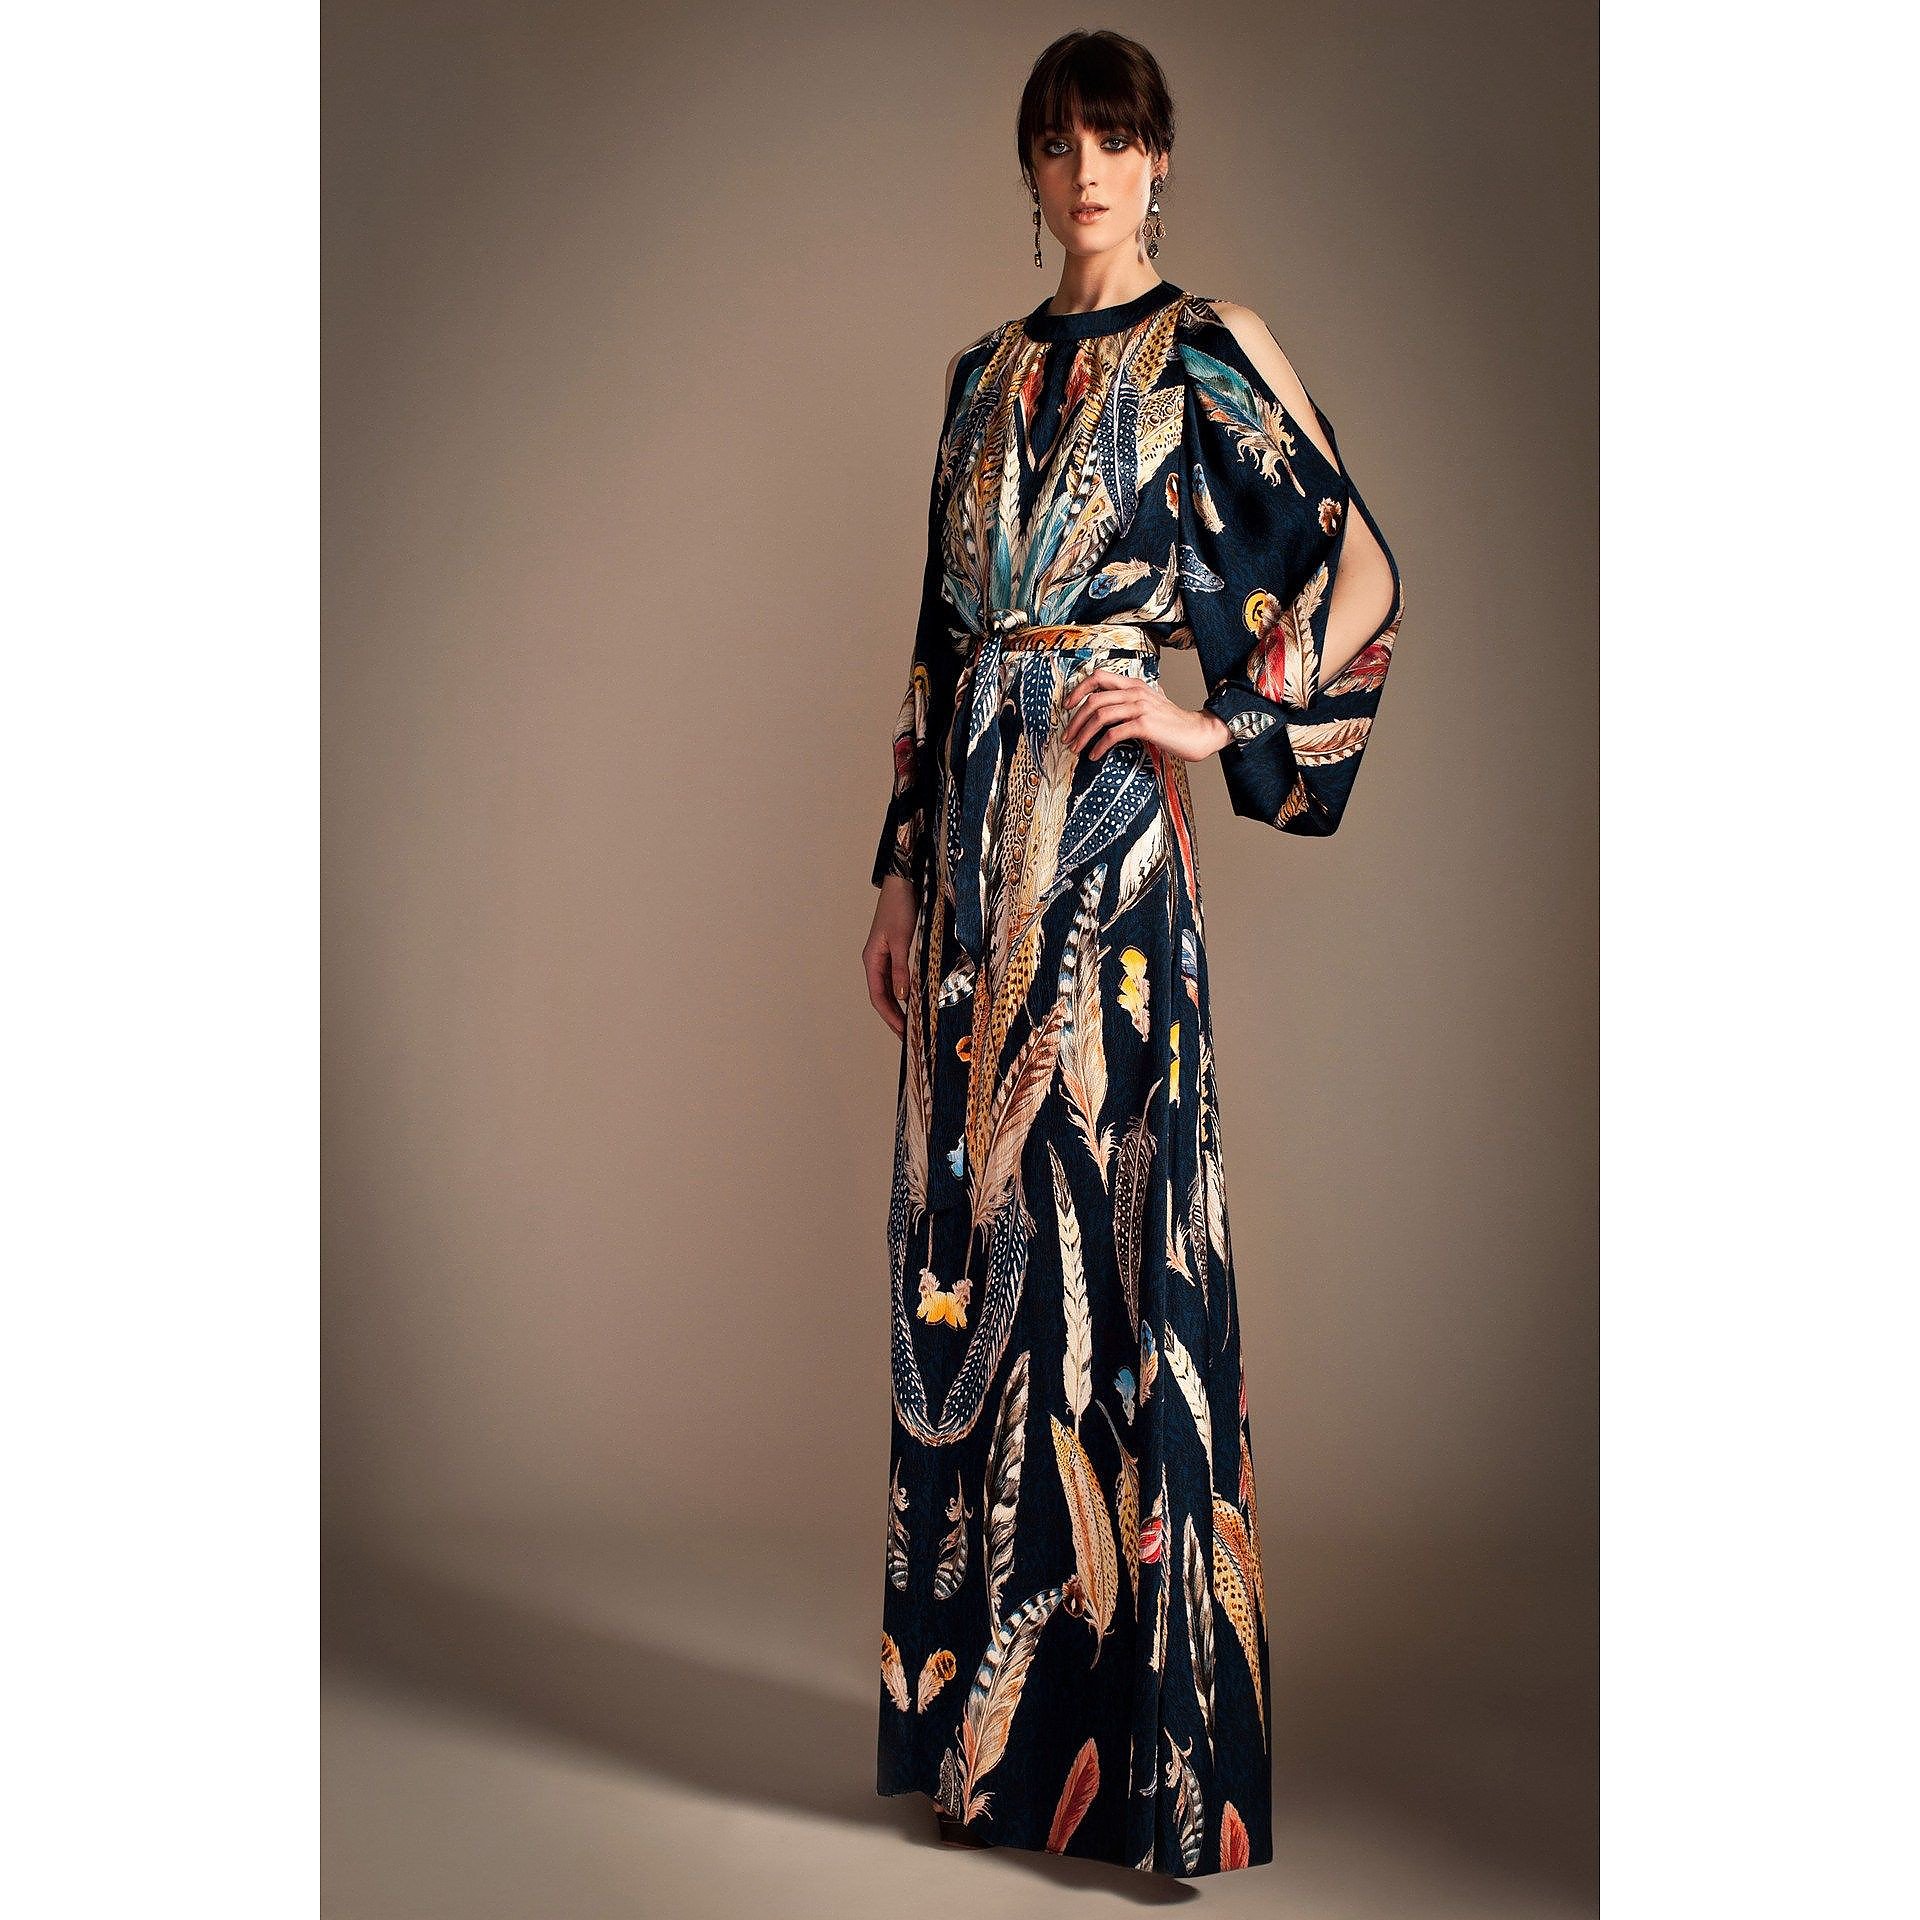 Temperley London Feather-Print Gown ...